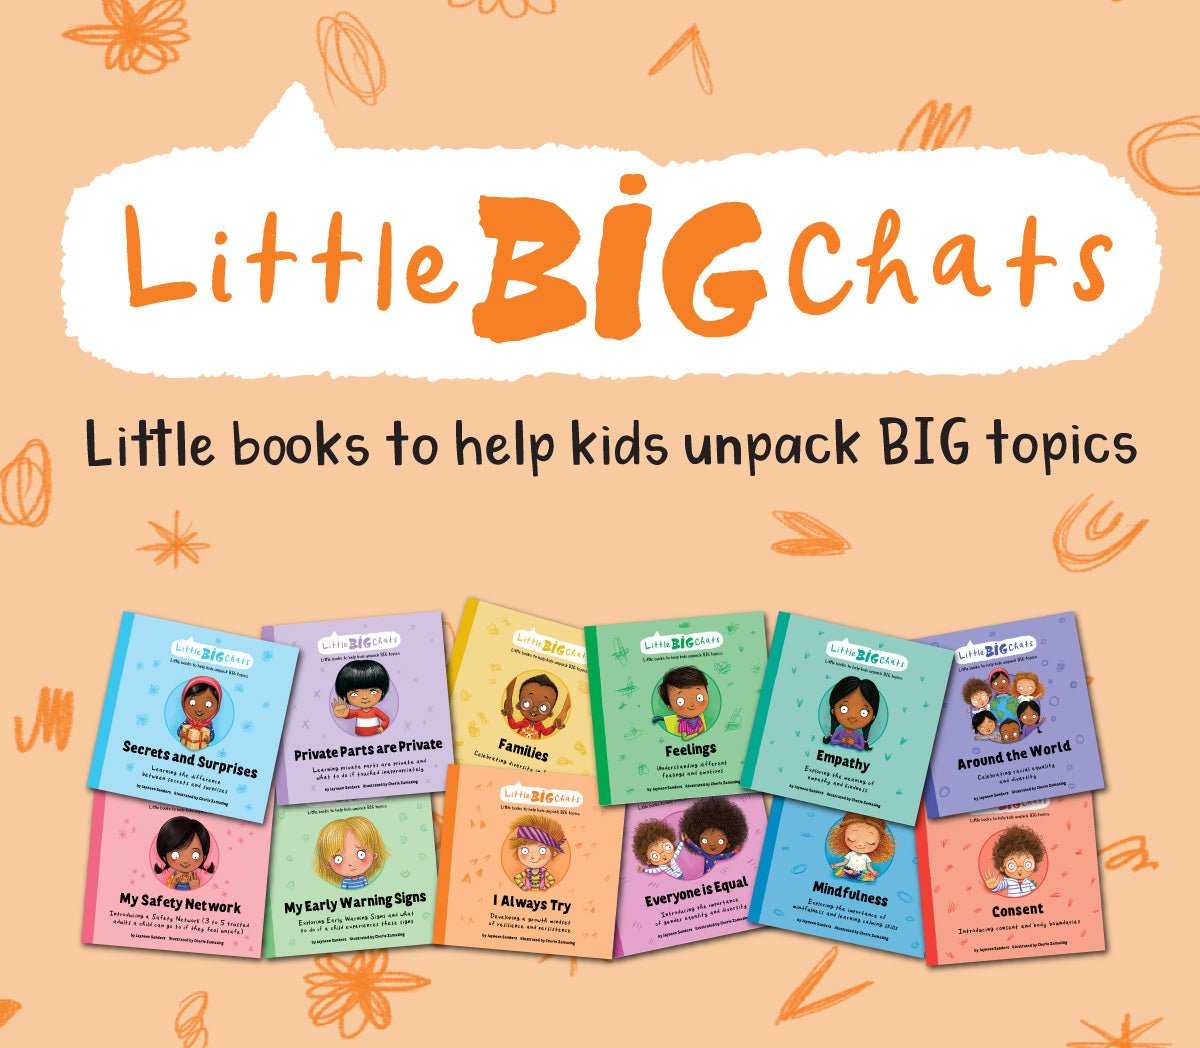 Promotional banner for the 'Little Big Chats' book series. Tagline: 'Little books to help kids unpack big topics'.  Ages 2-6 Years, Discussion Questions in each book.